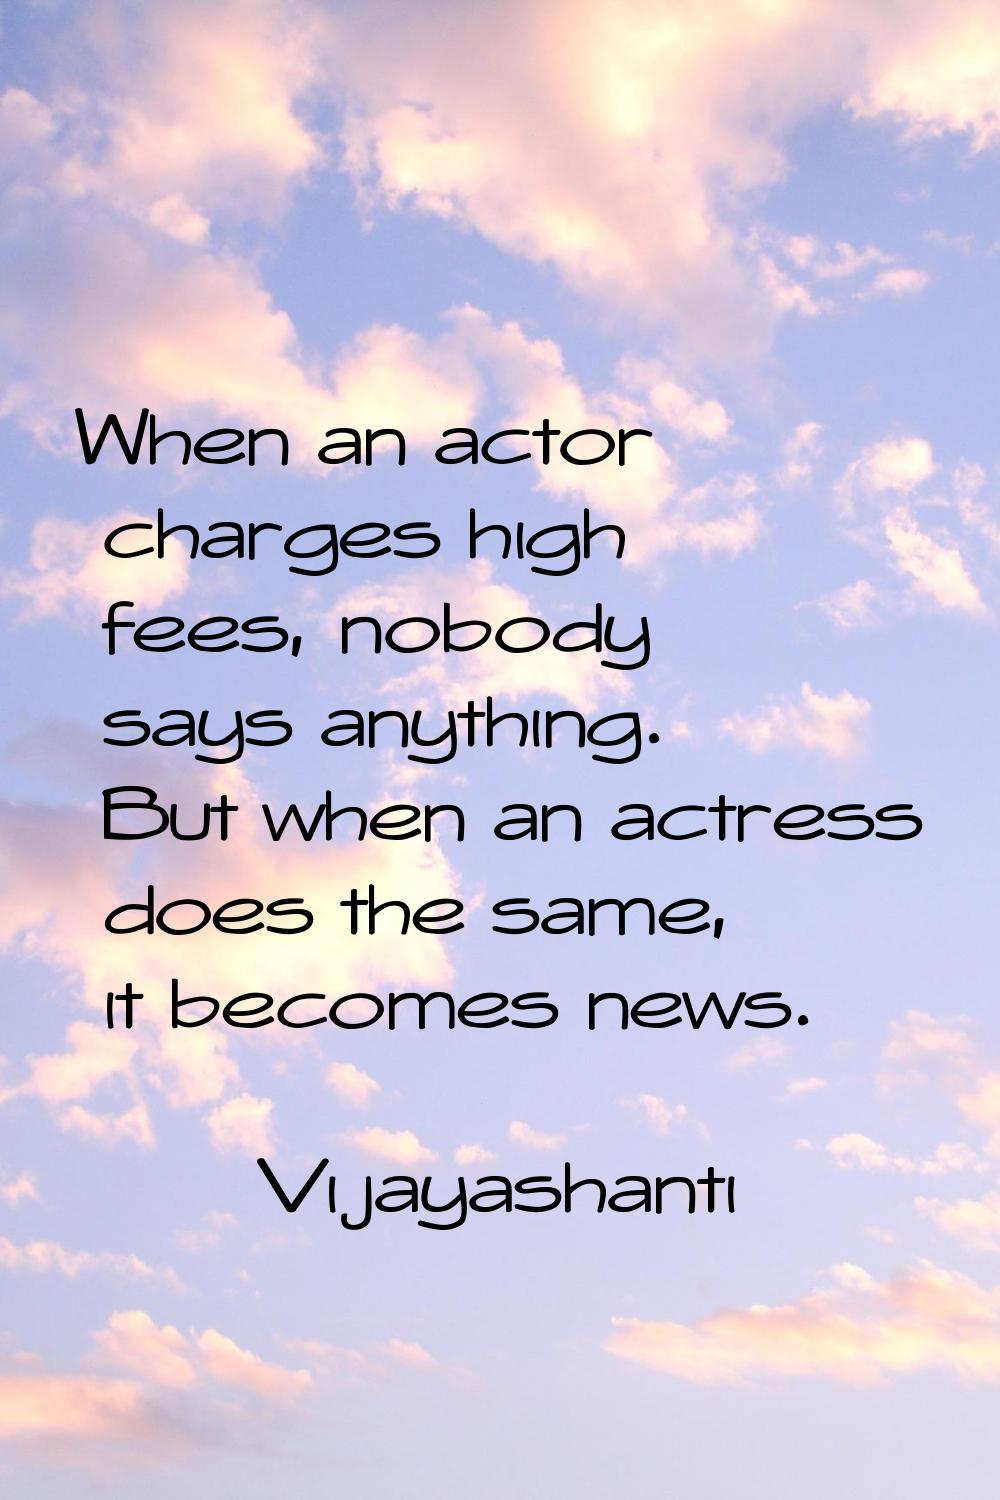 When an actor charges high fees, nobody says anything. But when an actress does the same, it become